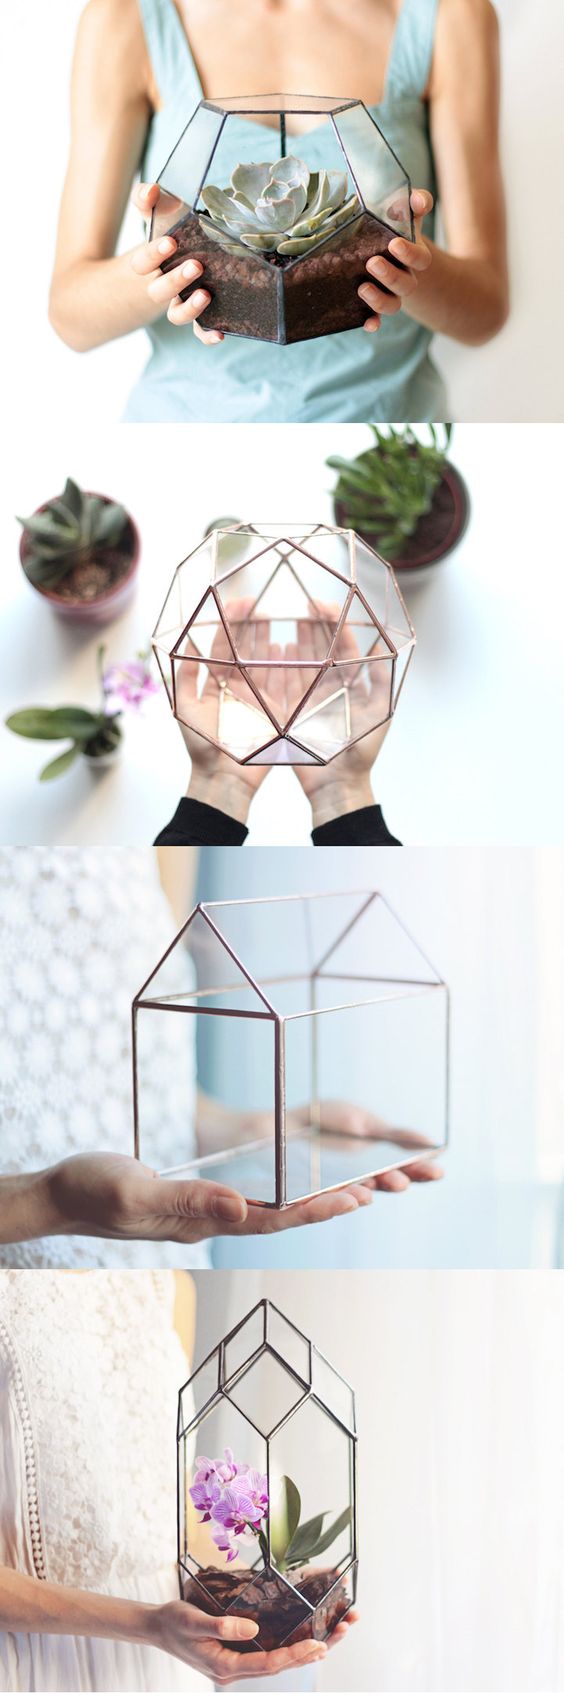 Istanbul-based Etsy shop Waen crafts geometric glassware that adds a modern touch to a conventional planter.